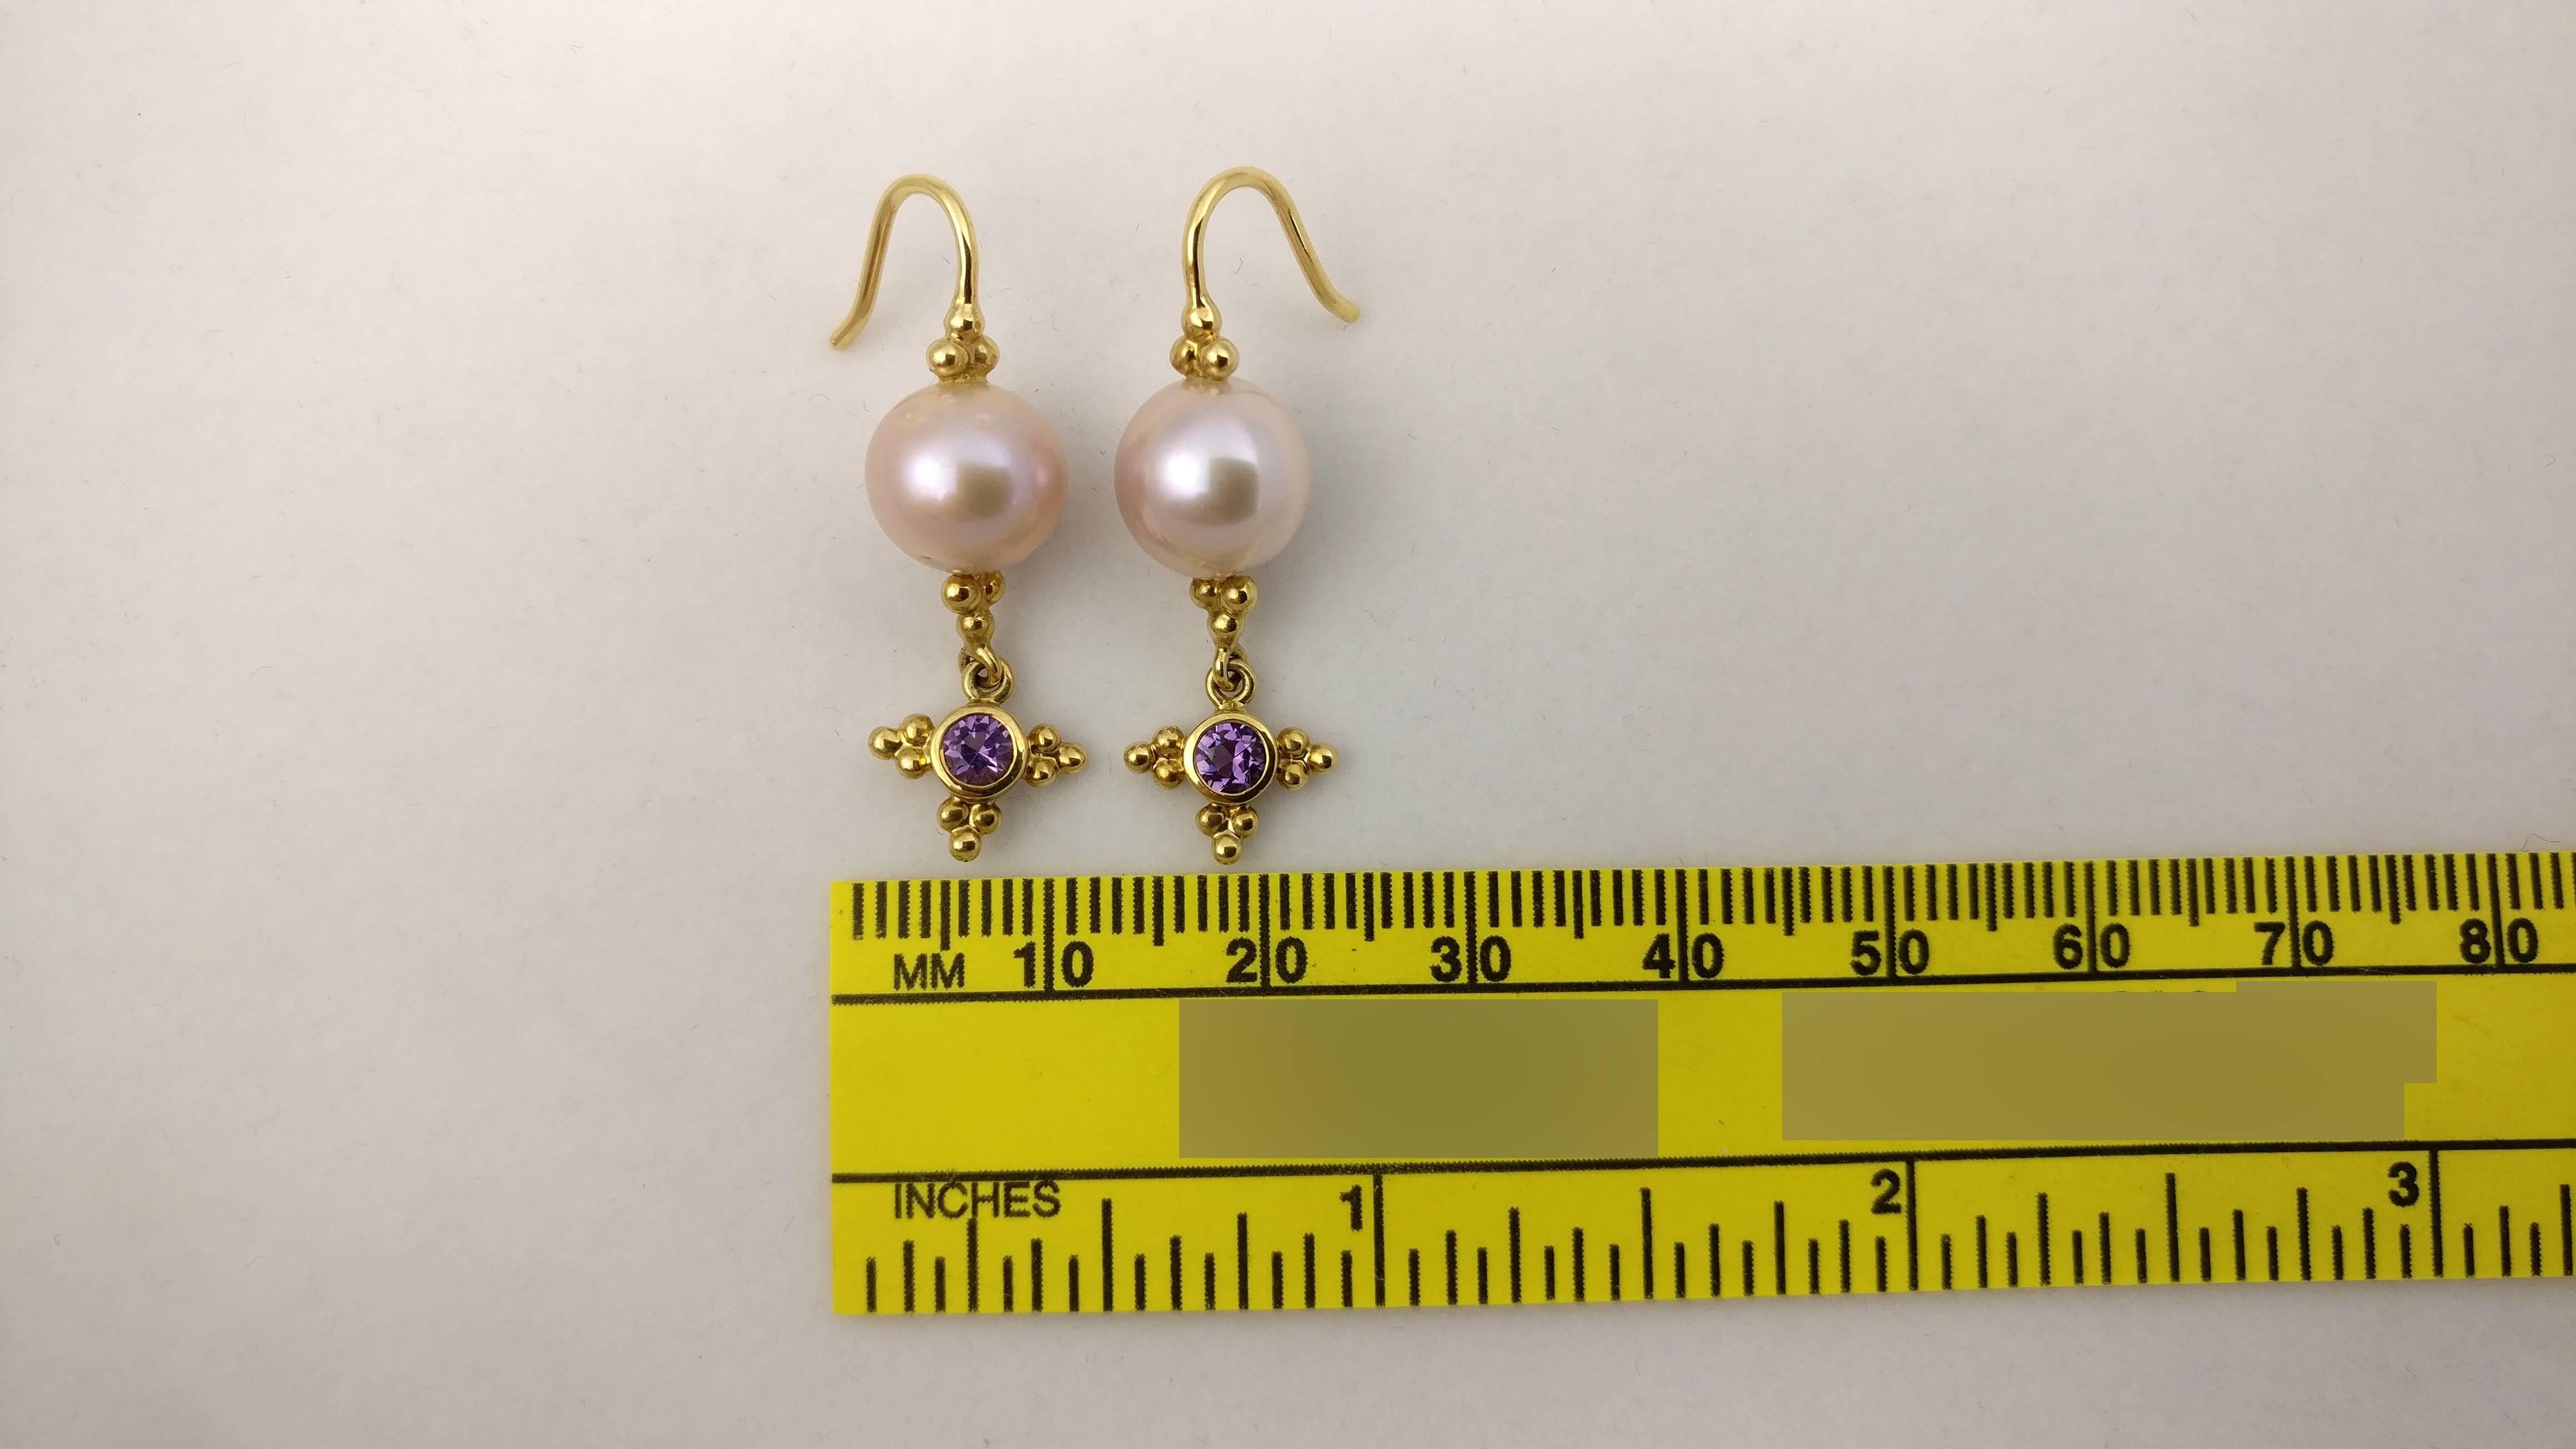 One of a kind 18K handmade French hook earrings with Pearl(2)=11.81ct and Amethyst(2)=0.26ct.